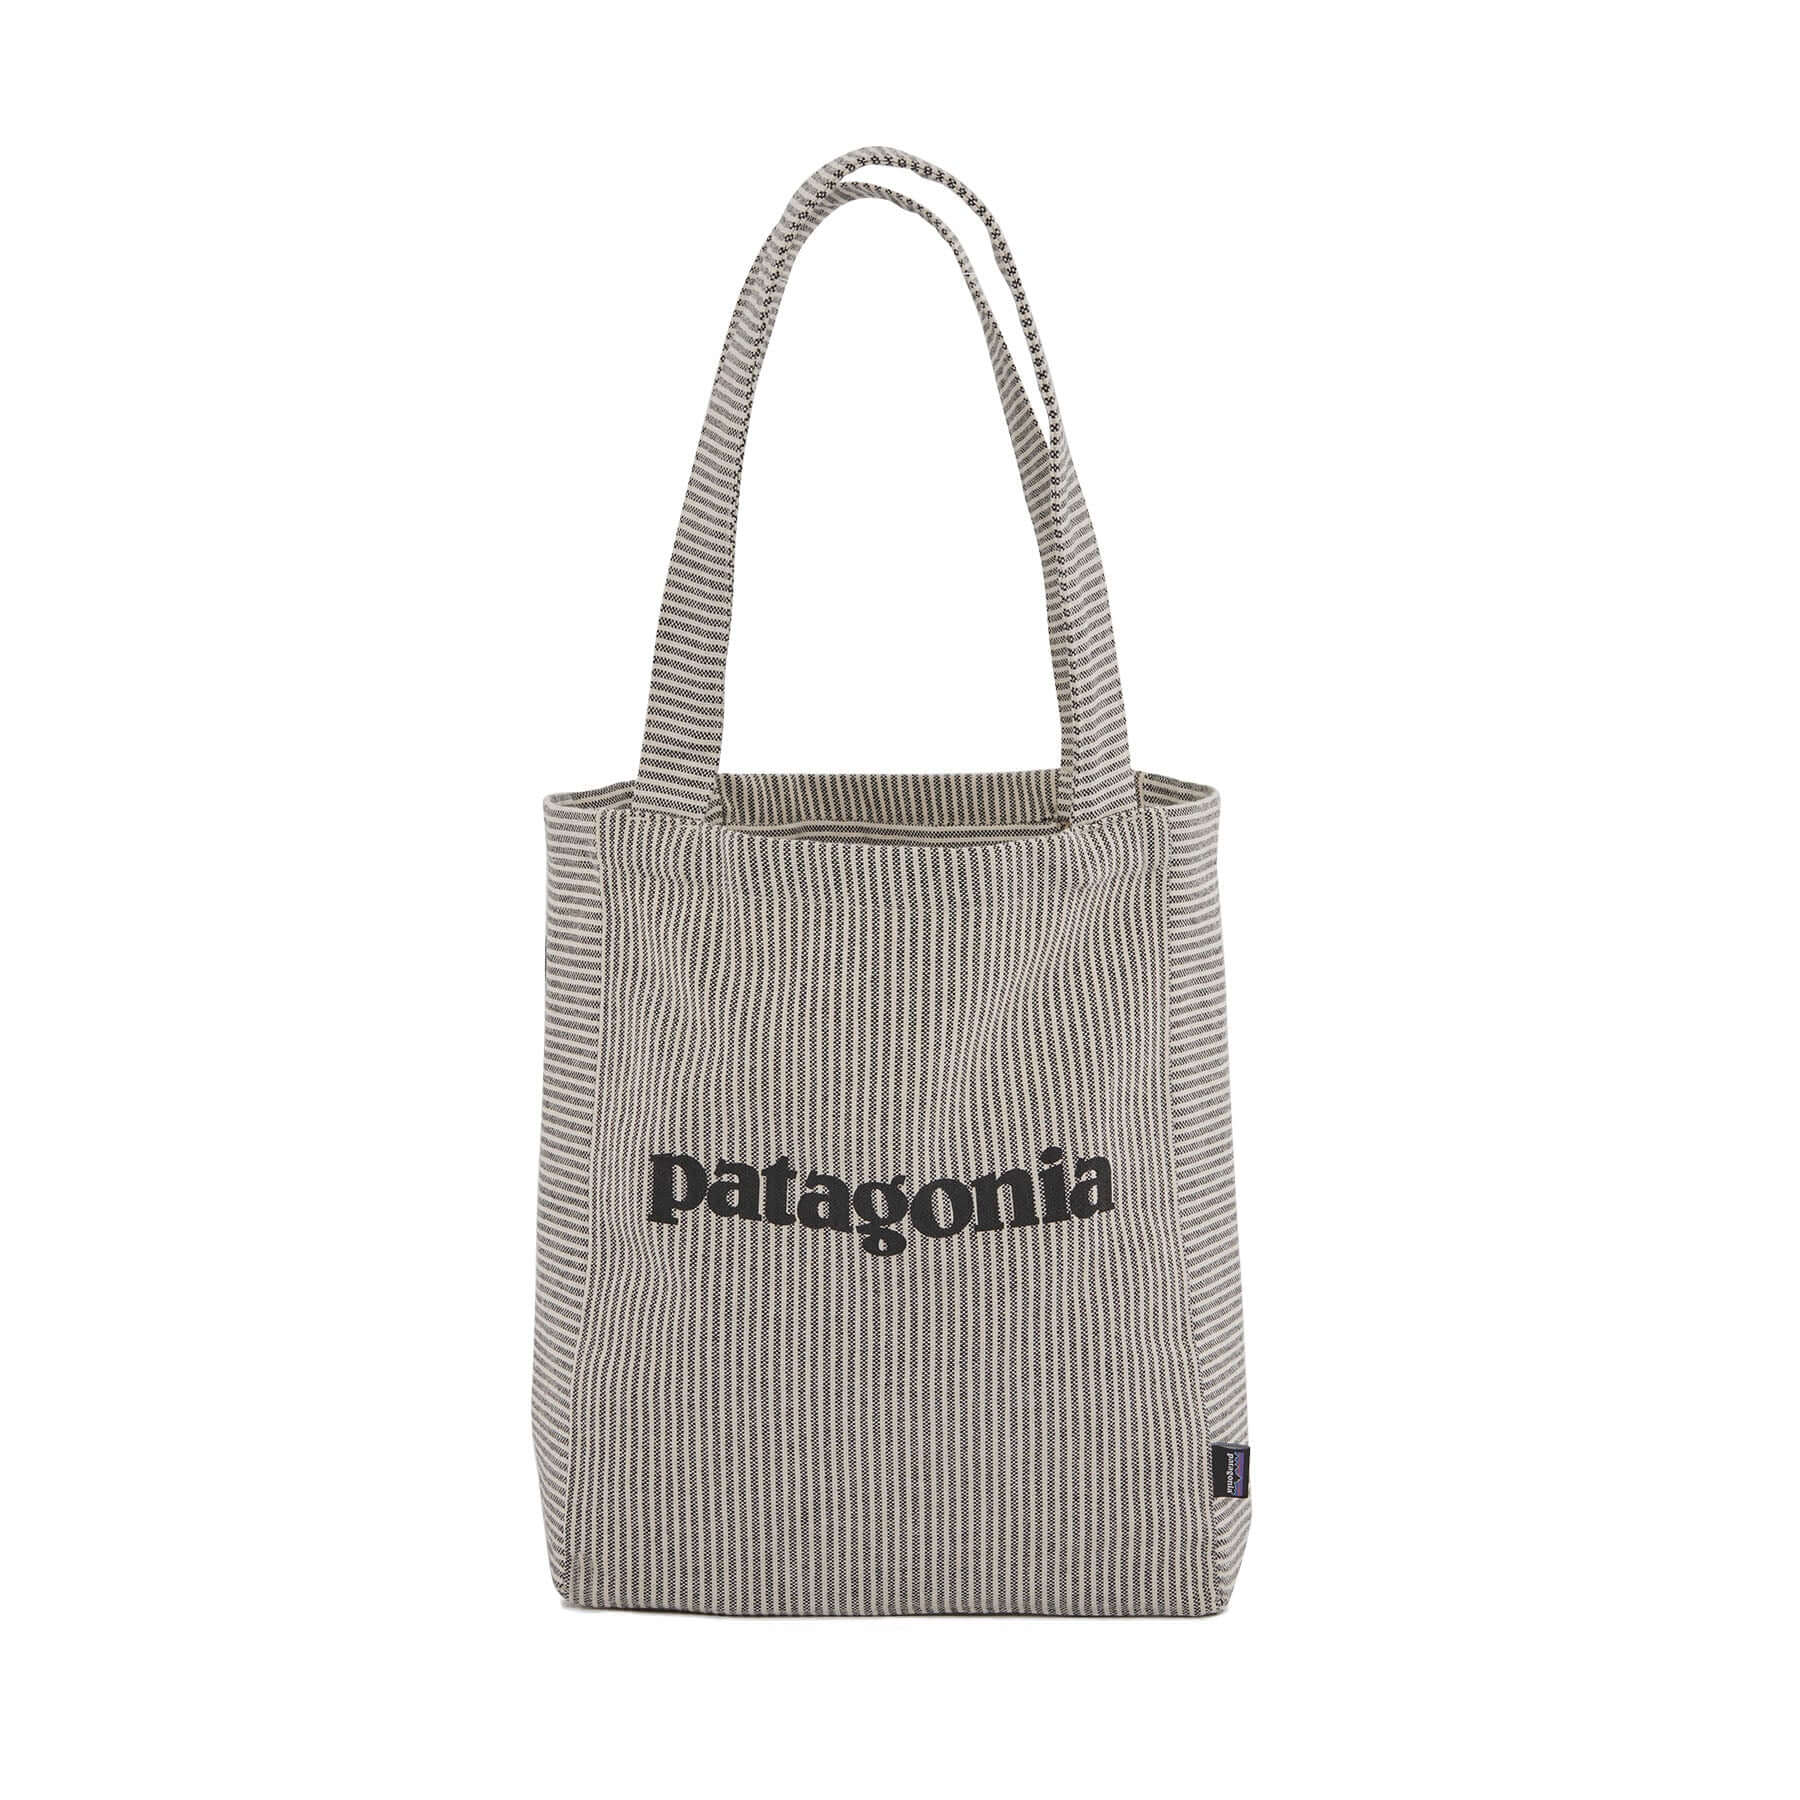 Patagonia Recycled Black Hole Gear Tote: First Look